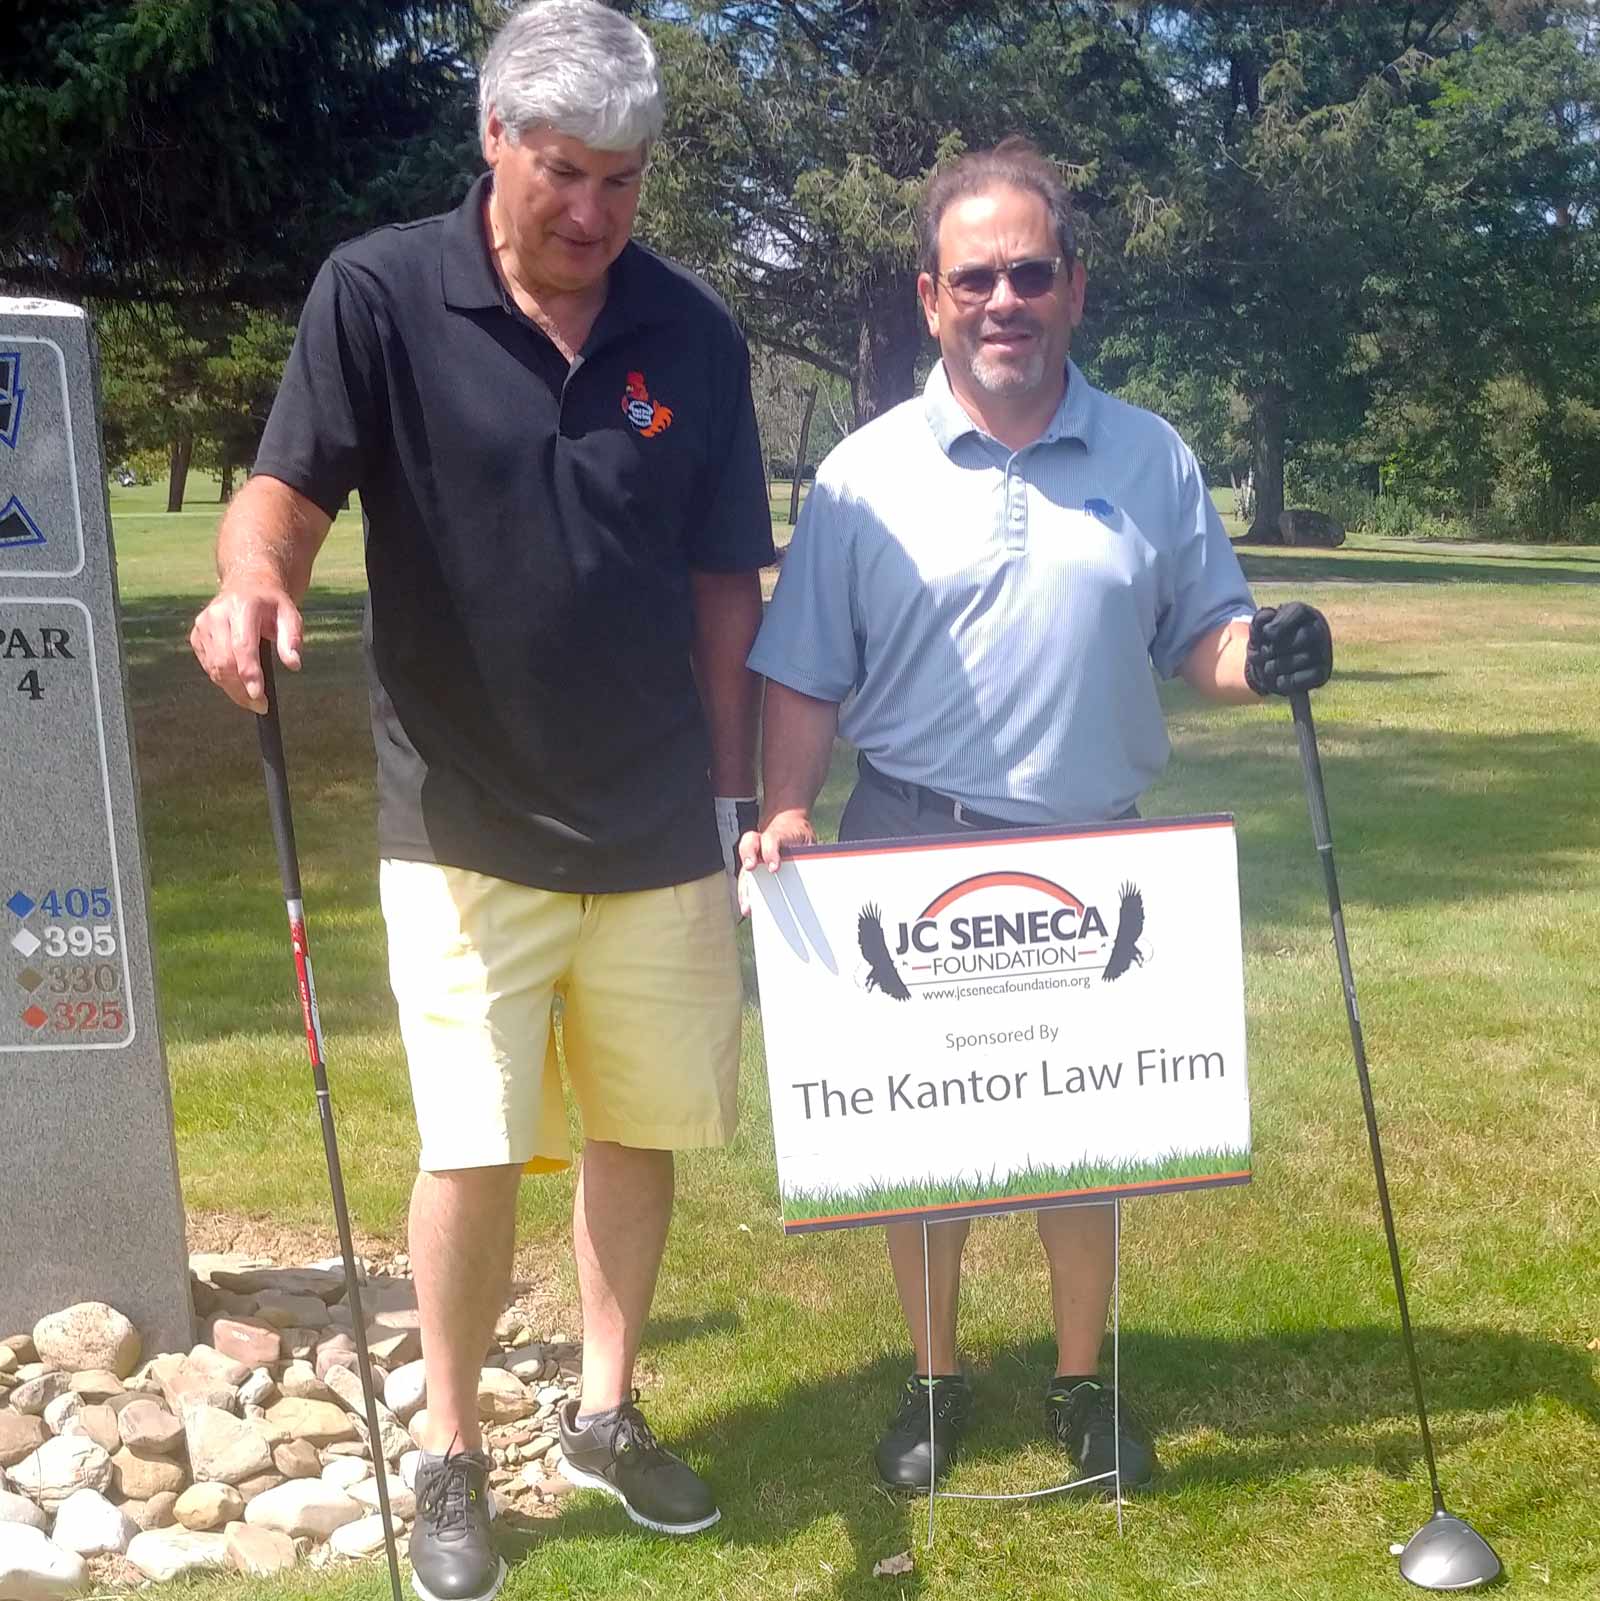 Steve Schonour from Hard Tales and Steve Kantor enjoying a day of golf at the JC Seneca Foundation Charity Tournament